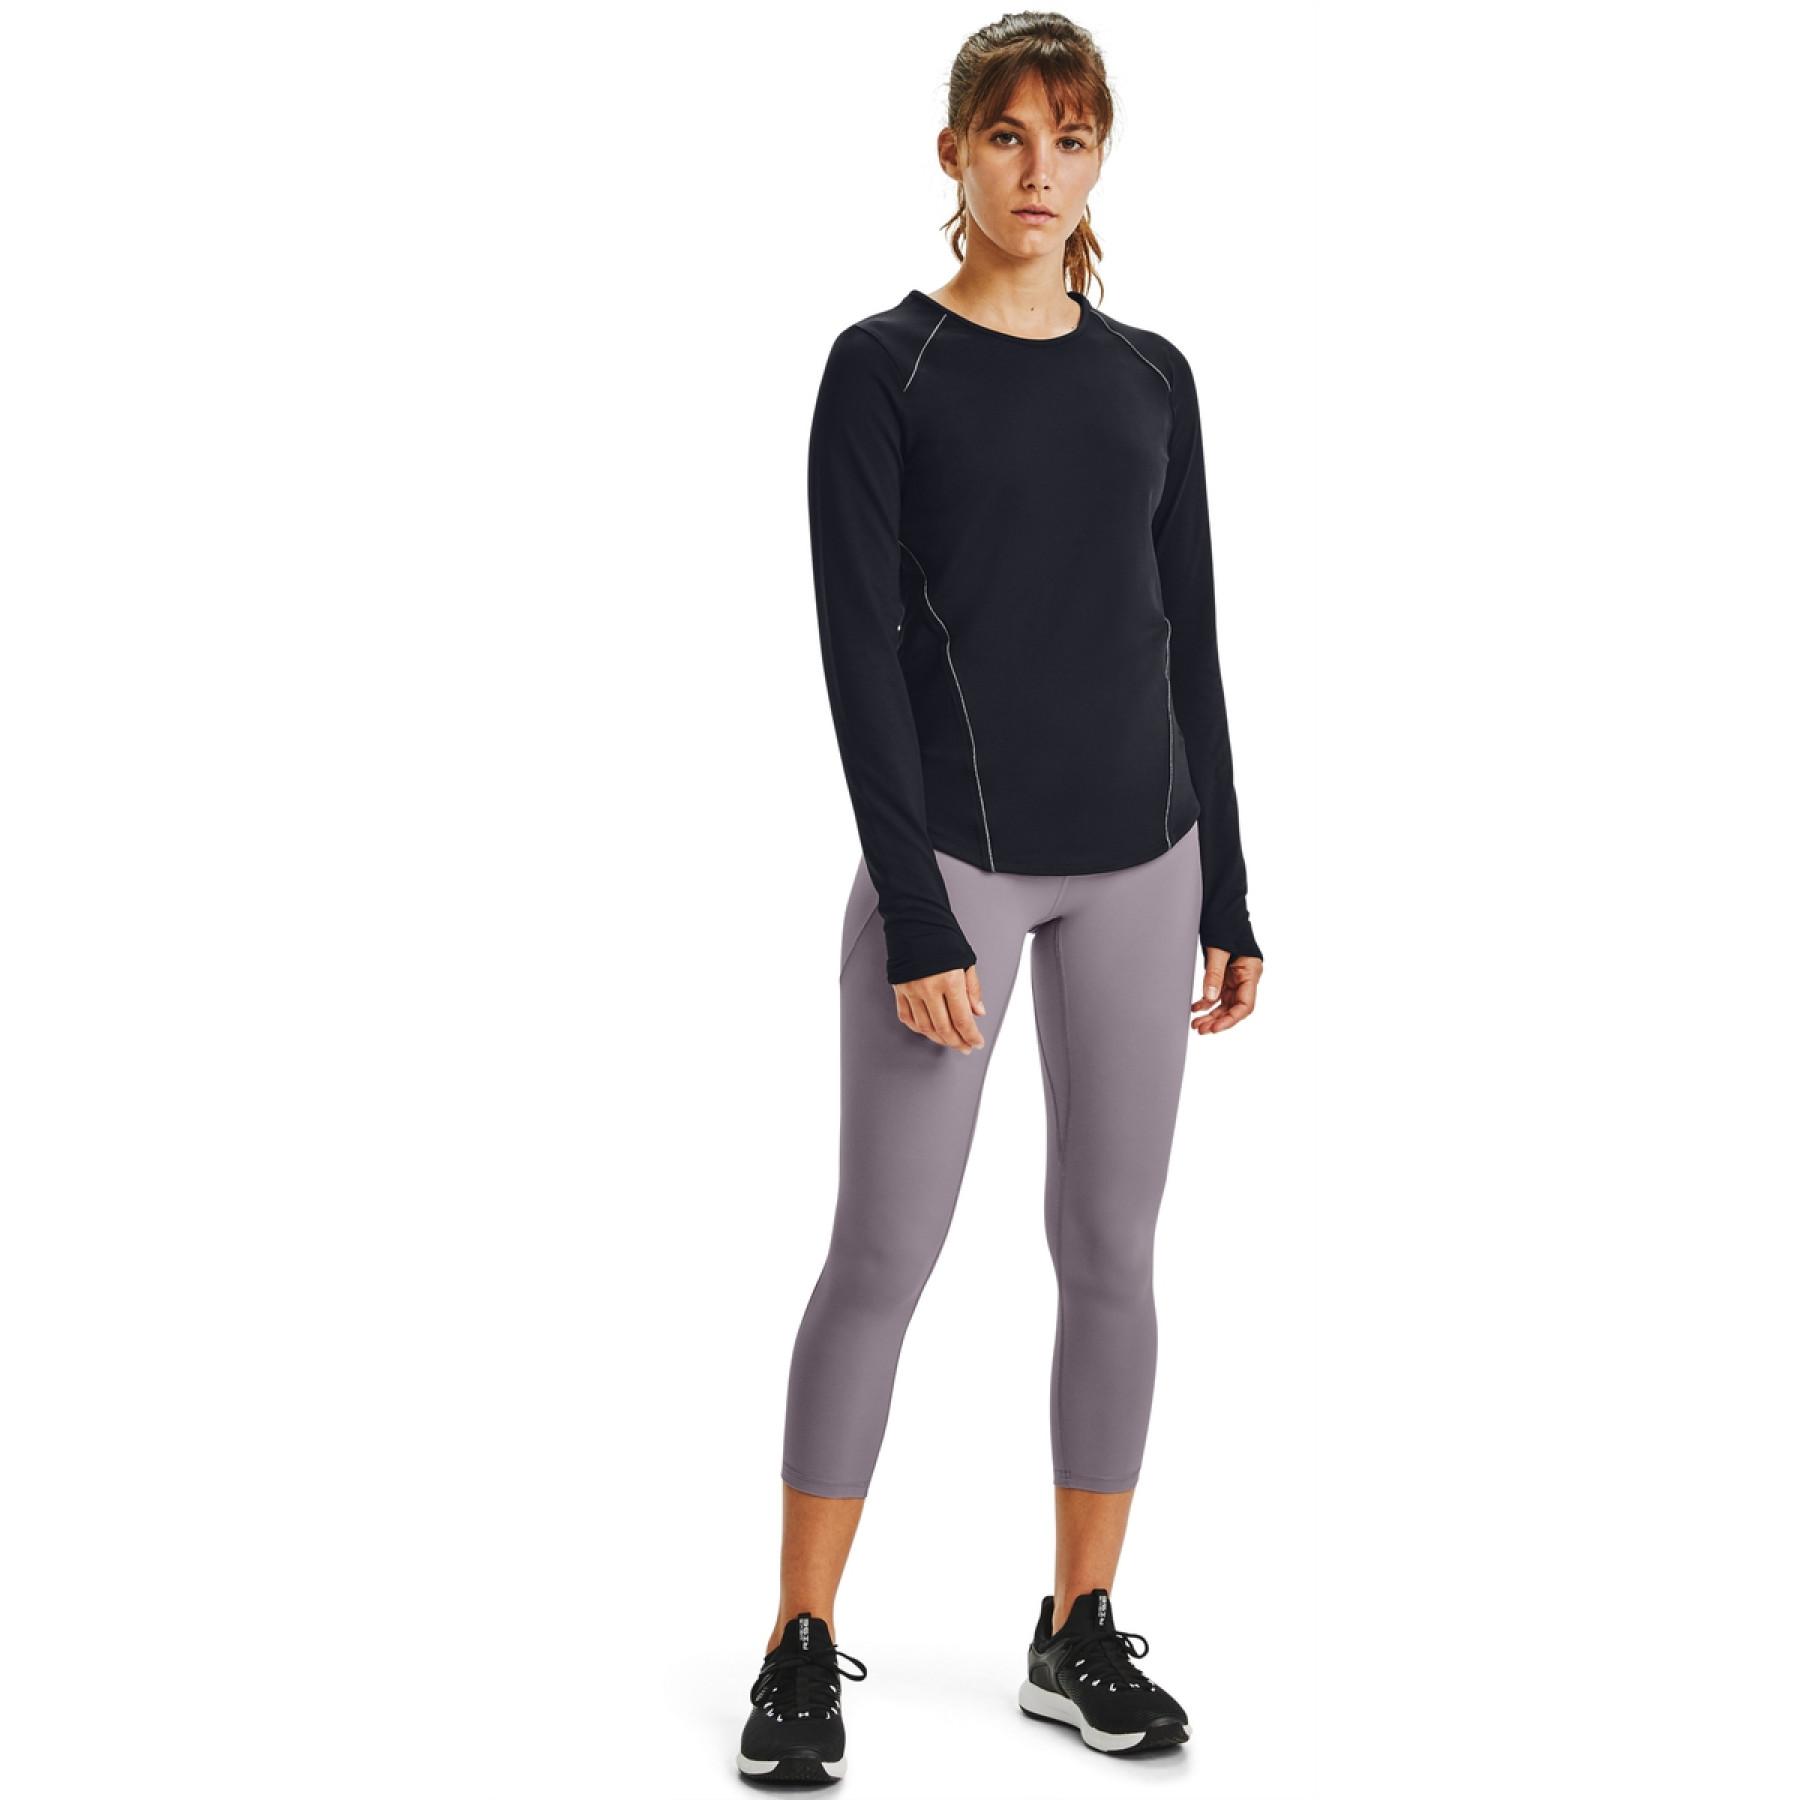 Women's jersey Under Armour à manches longues HydraFuse Crew